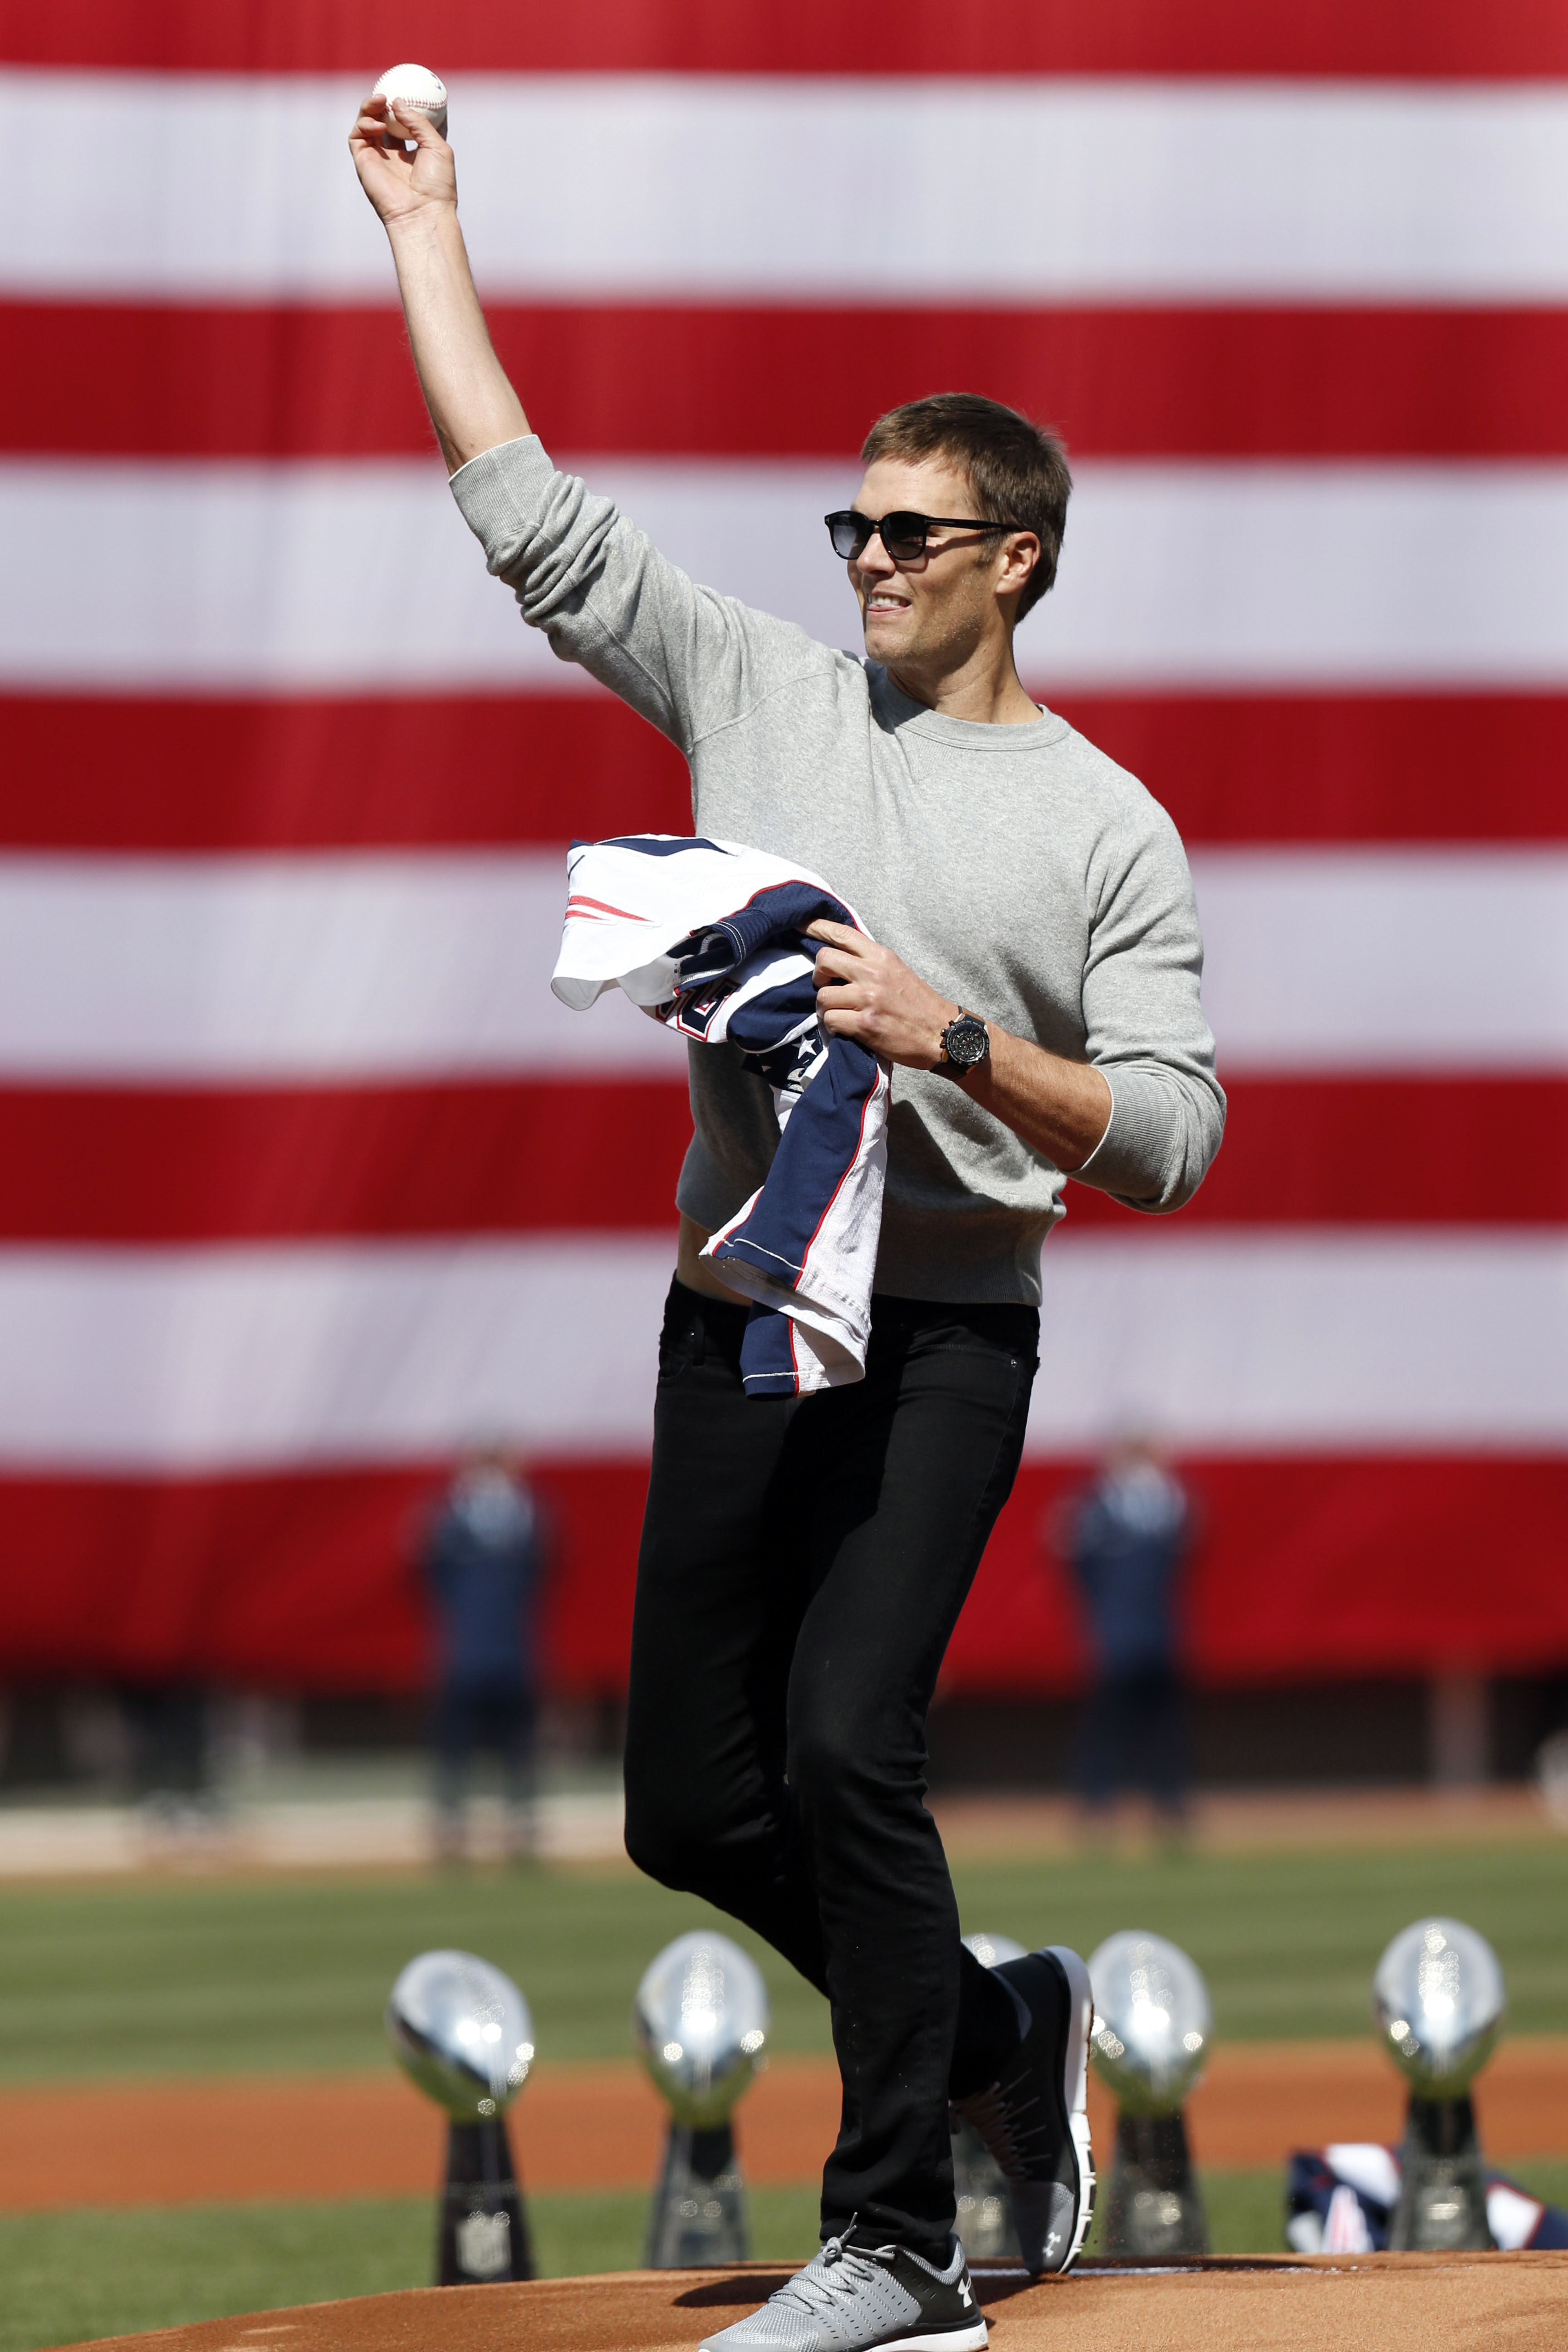 These photos of Tom Brady at Red Sox Opening Day are truly glorious